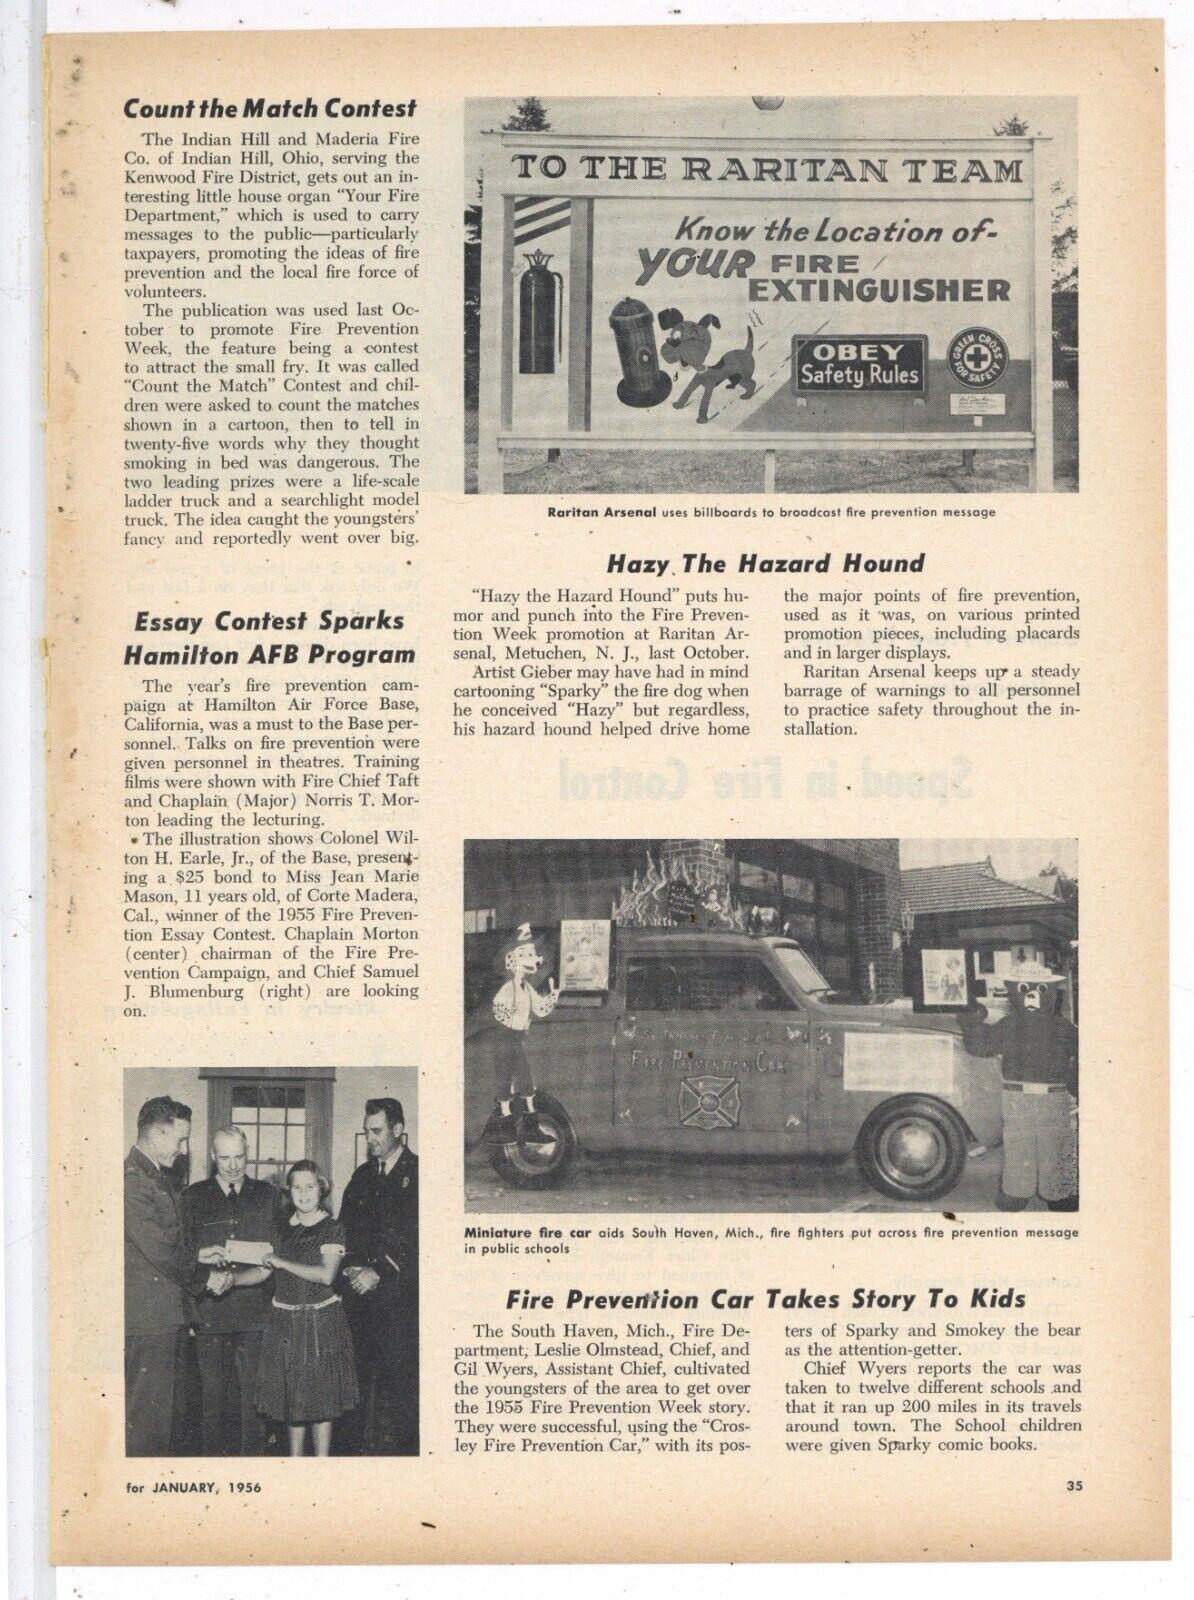 1956 Article & Pic: Crosley Miniature Fire Truck w/ South Haven Fire Department